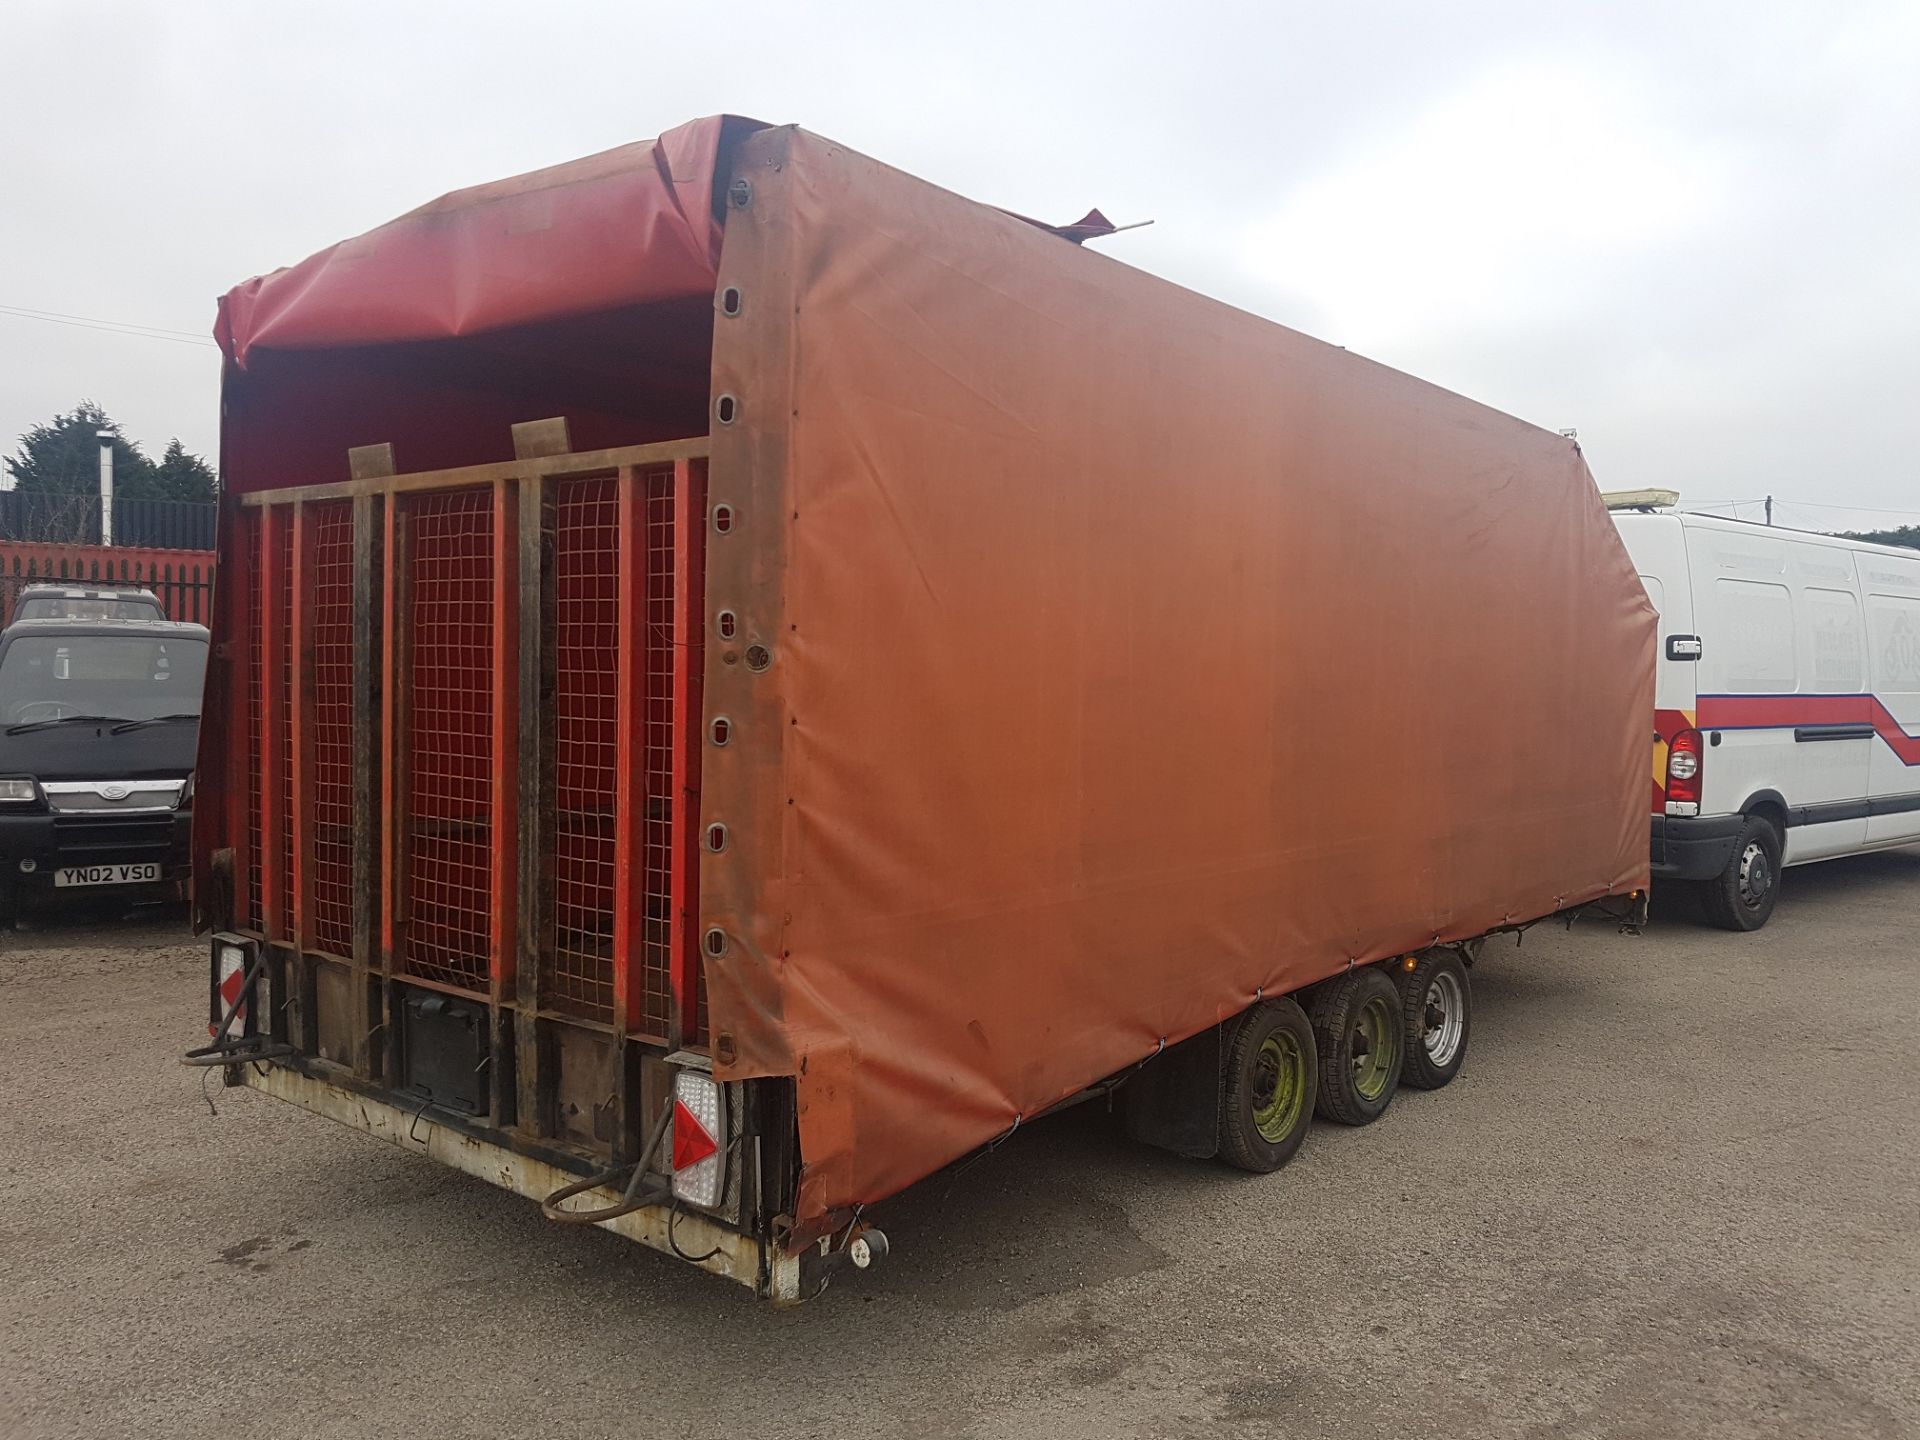 TRI-AXLE BEAVER-TAIL CAR TRANSPORTER COVERED TRAILER *PLUS VAT*   NEW AXLE SPRINGS, BRAKES AND LED - Image 8 of 13